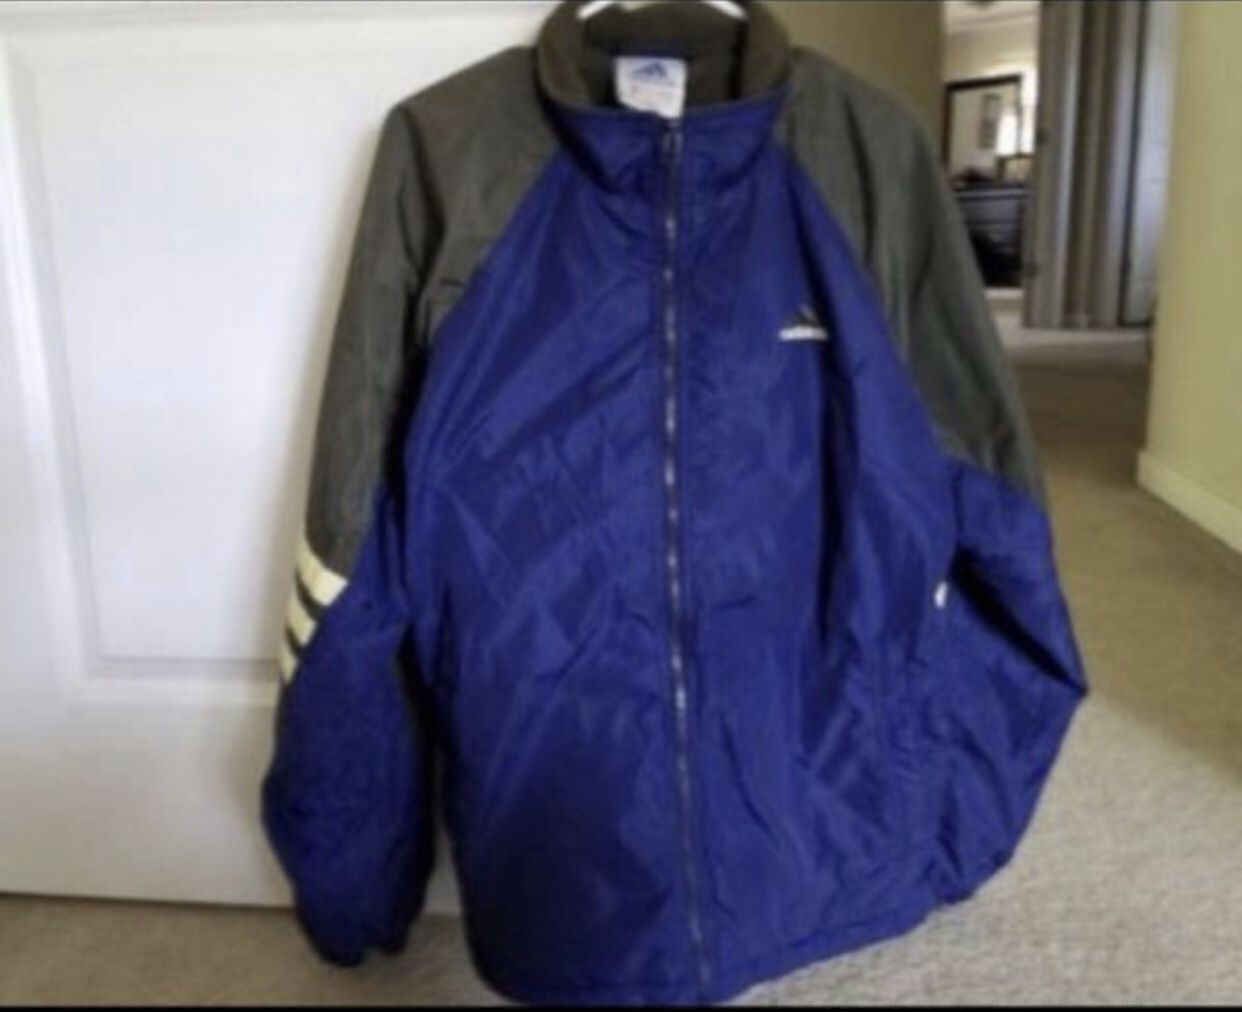 Men adidas jacket for SALE! Price firm